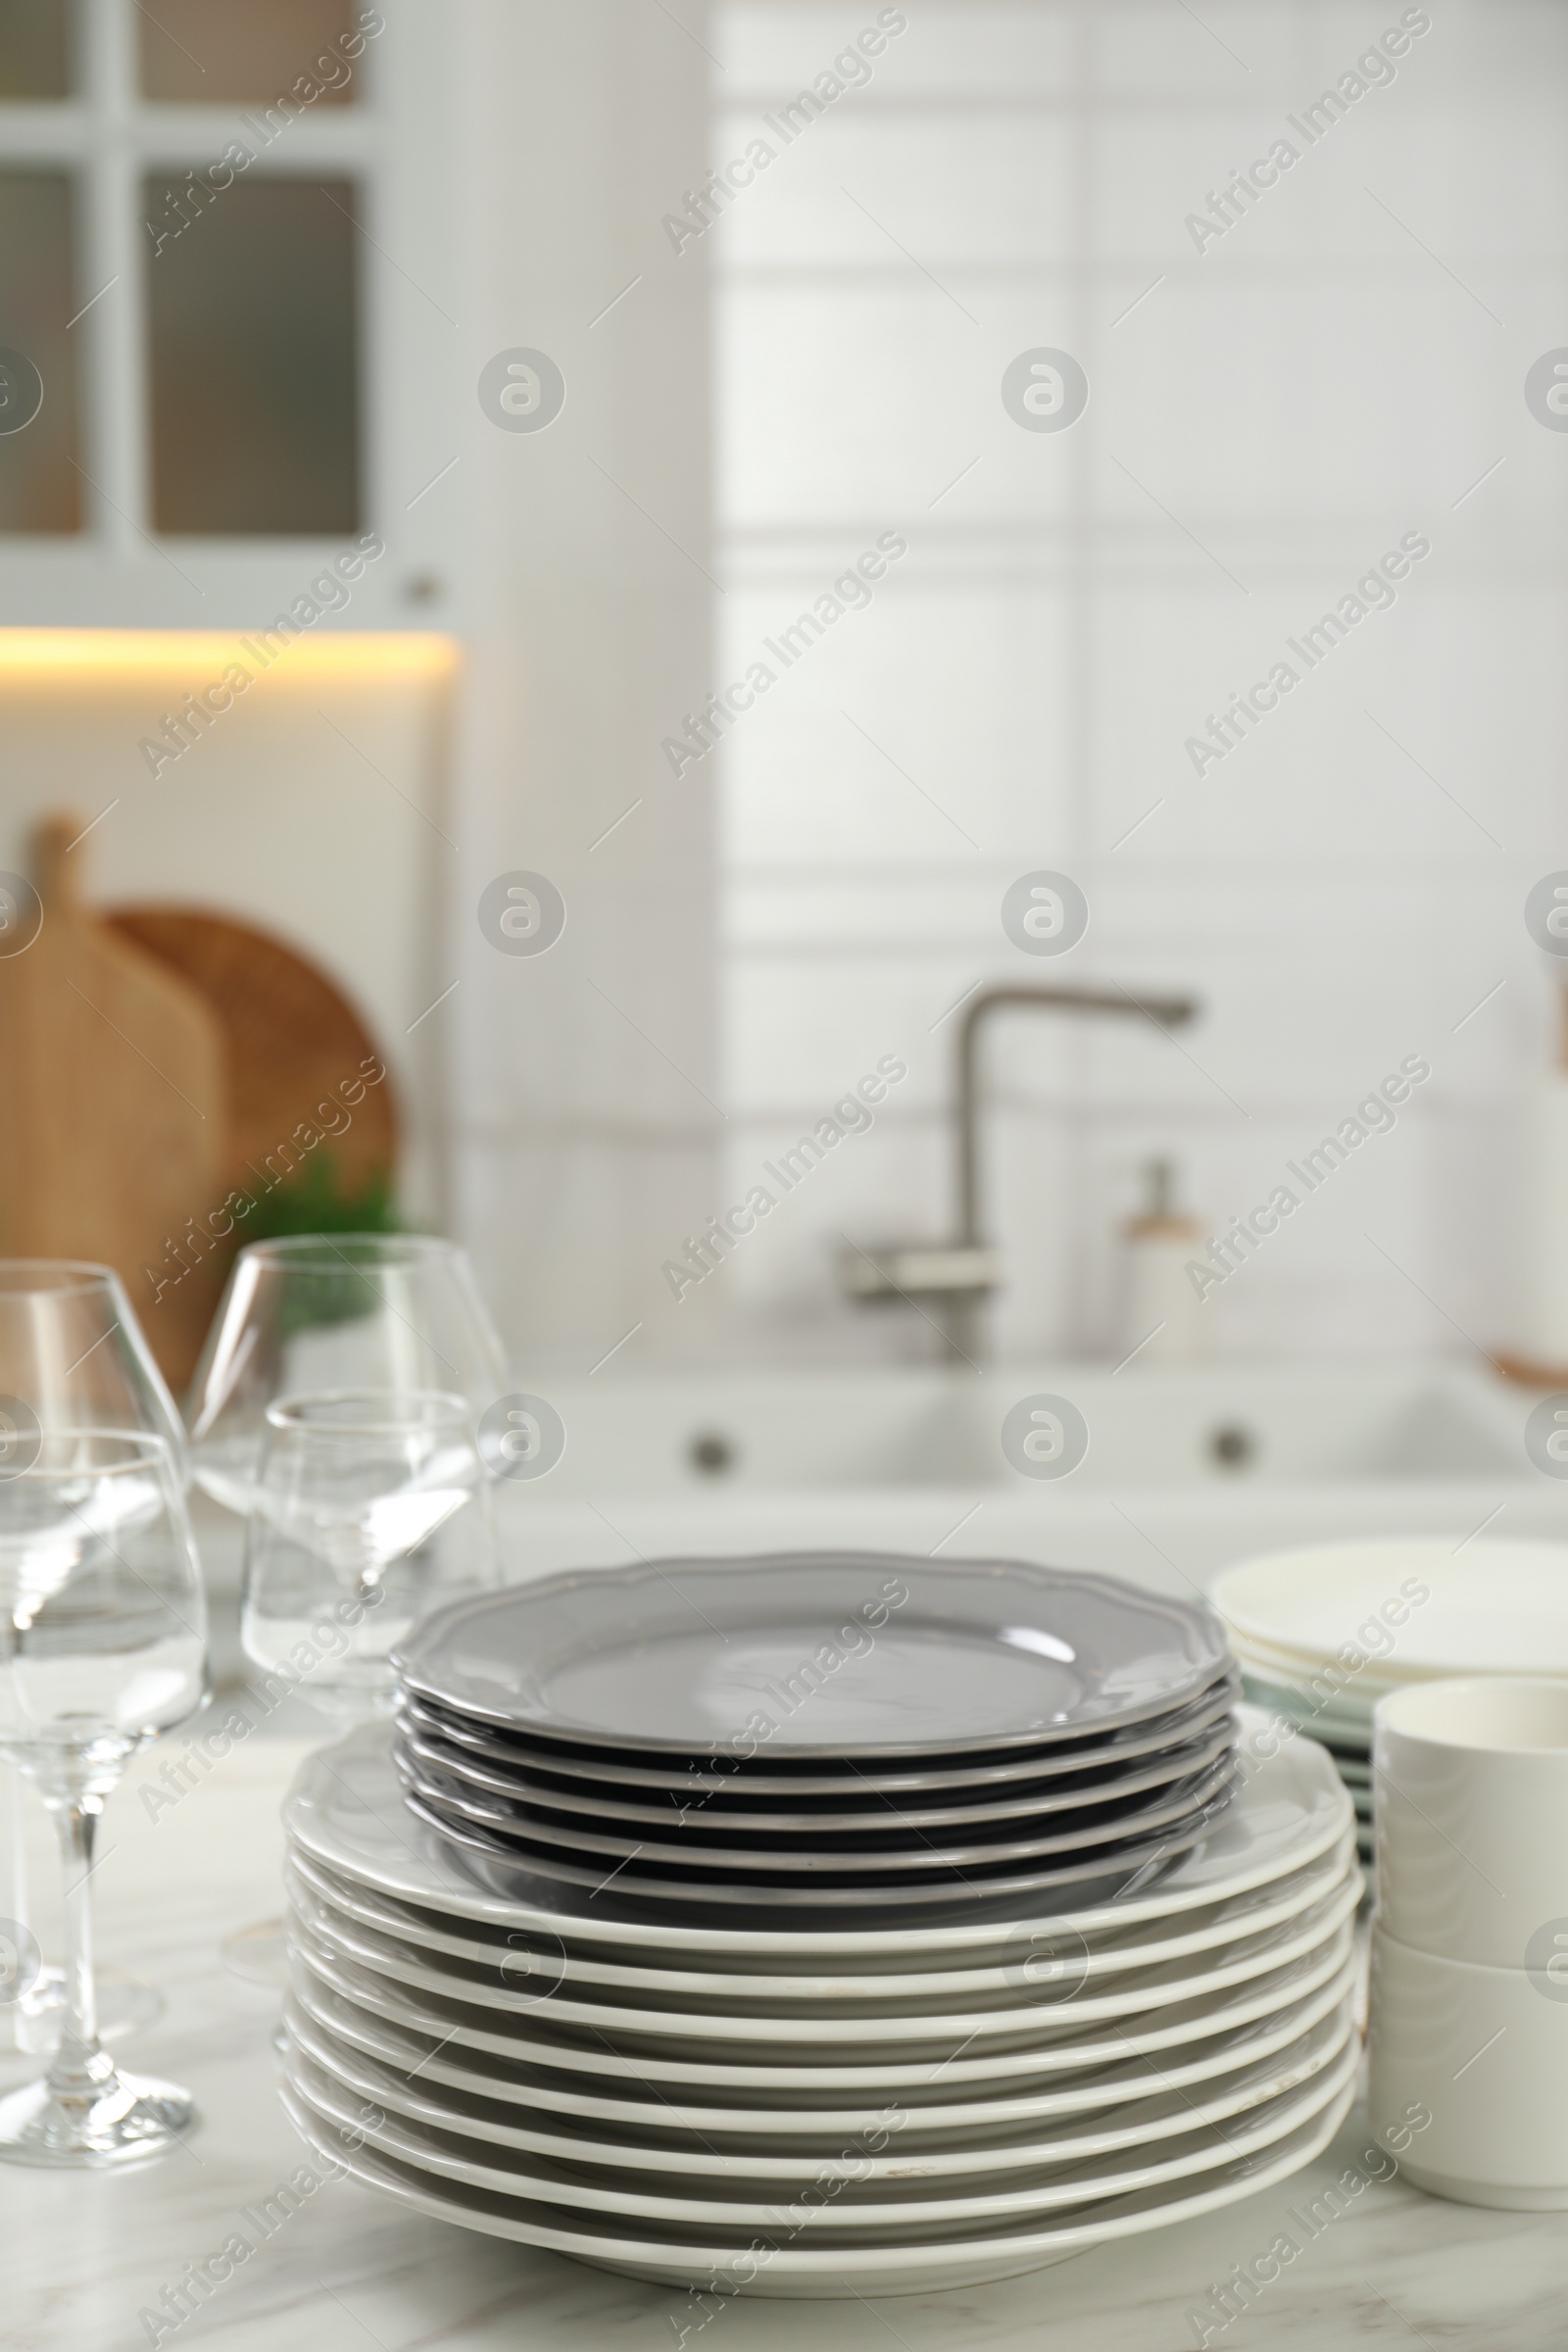 Photo of Clean plates and glasses on white marble table in kitchen